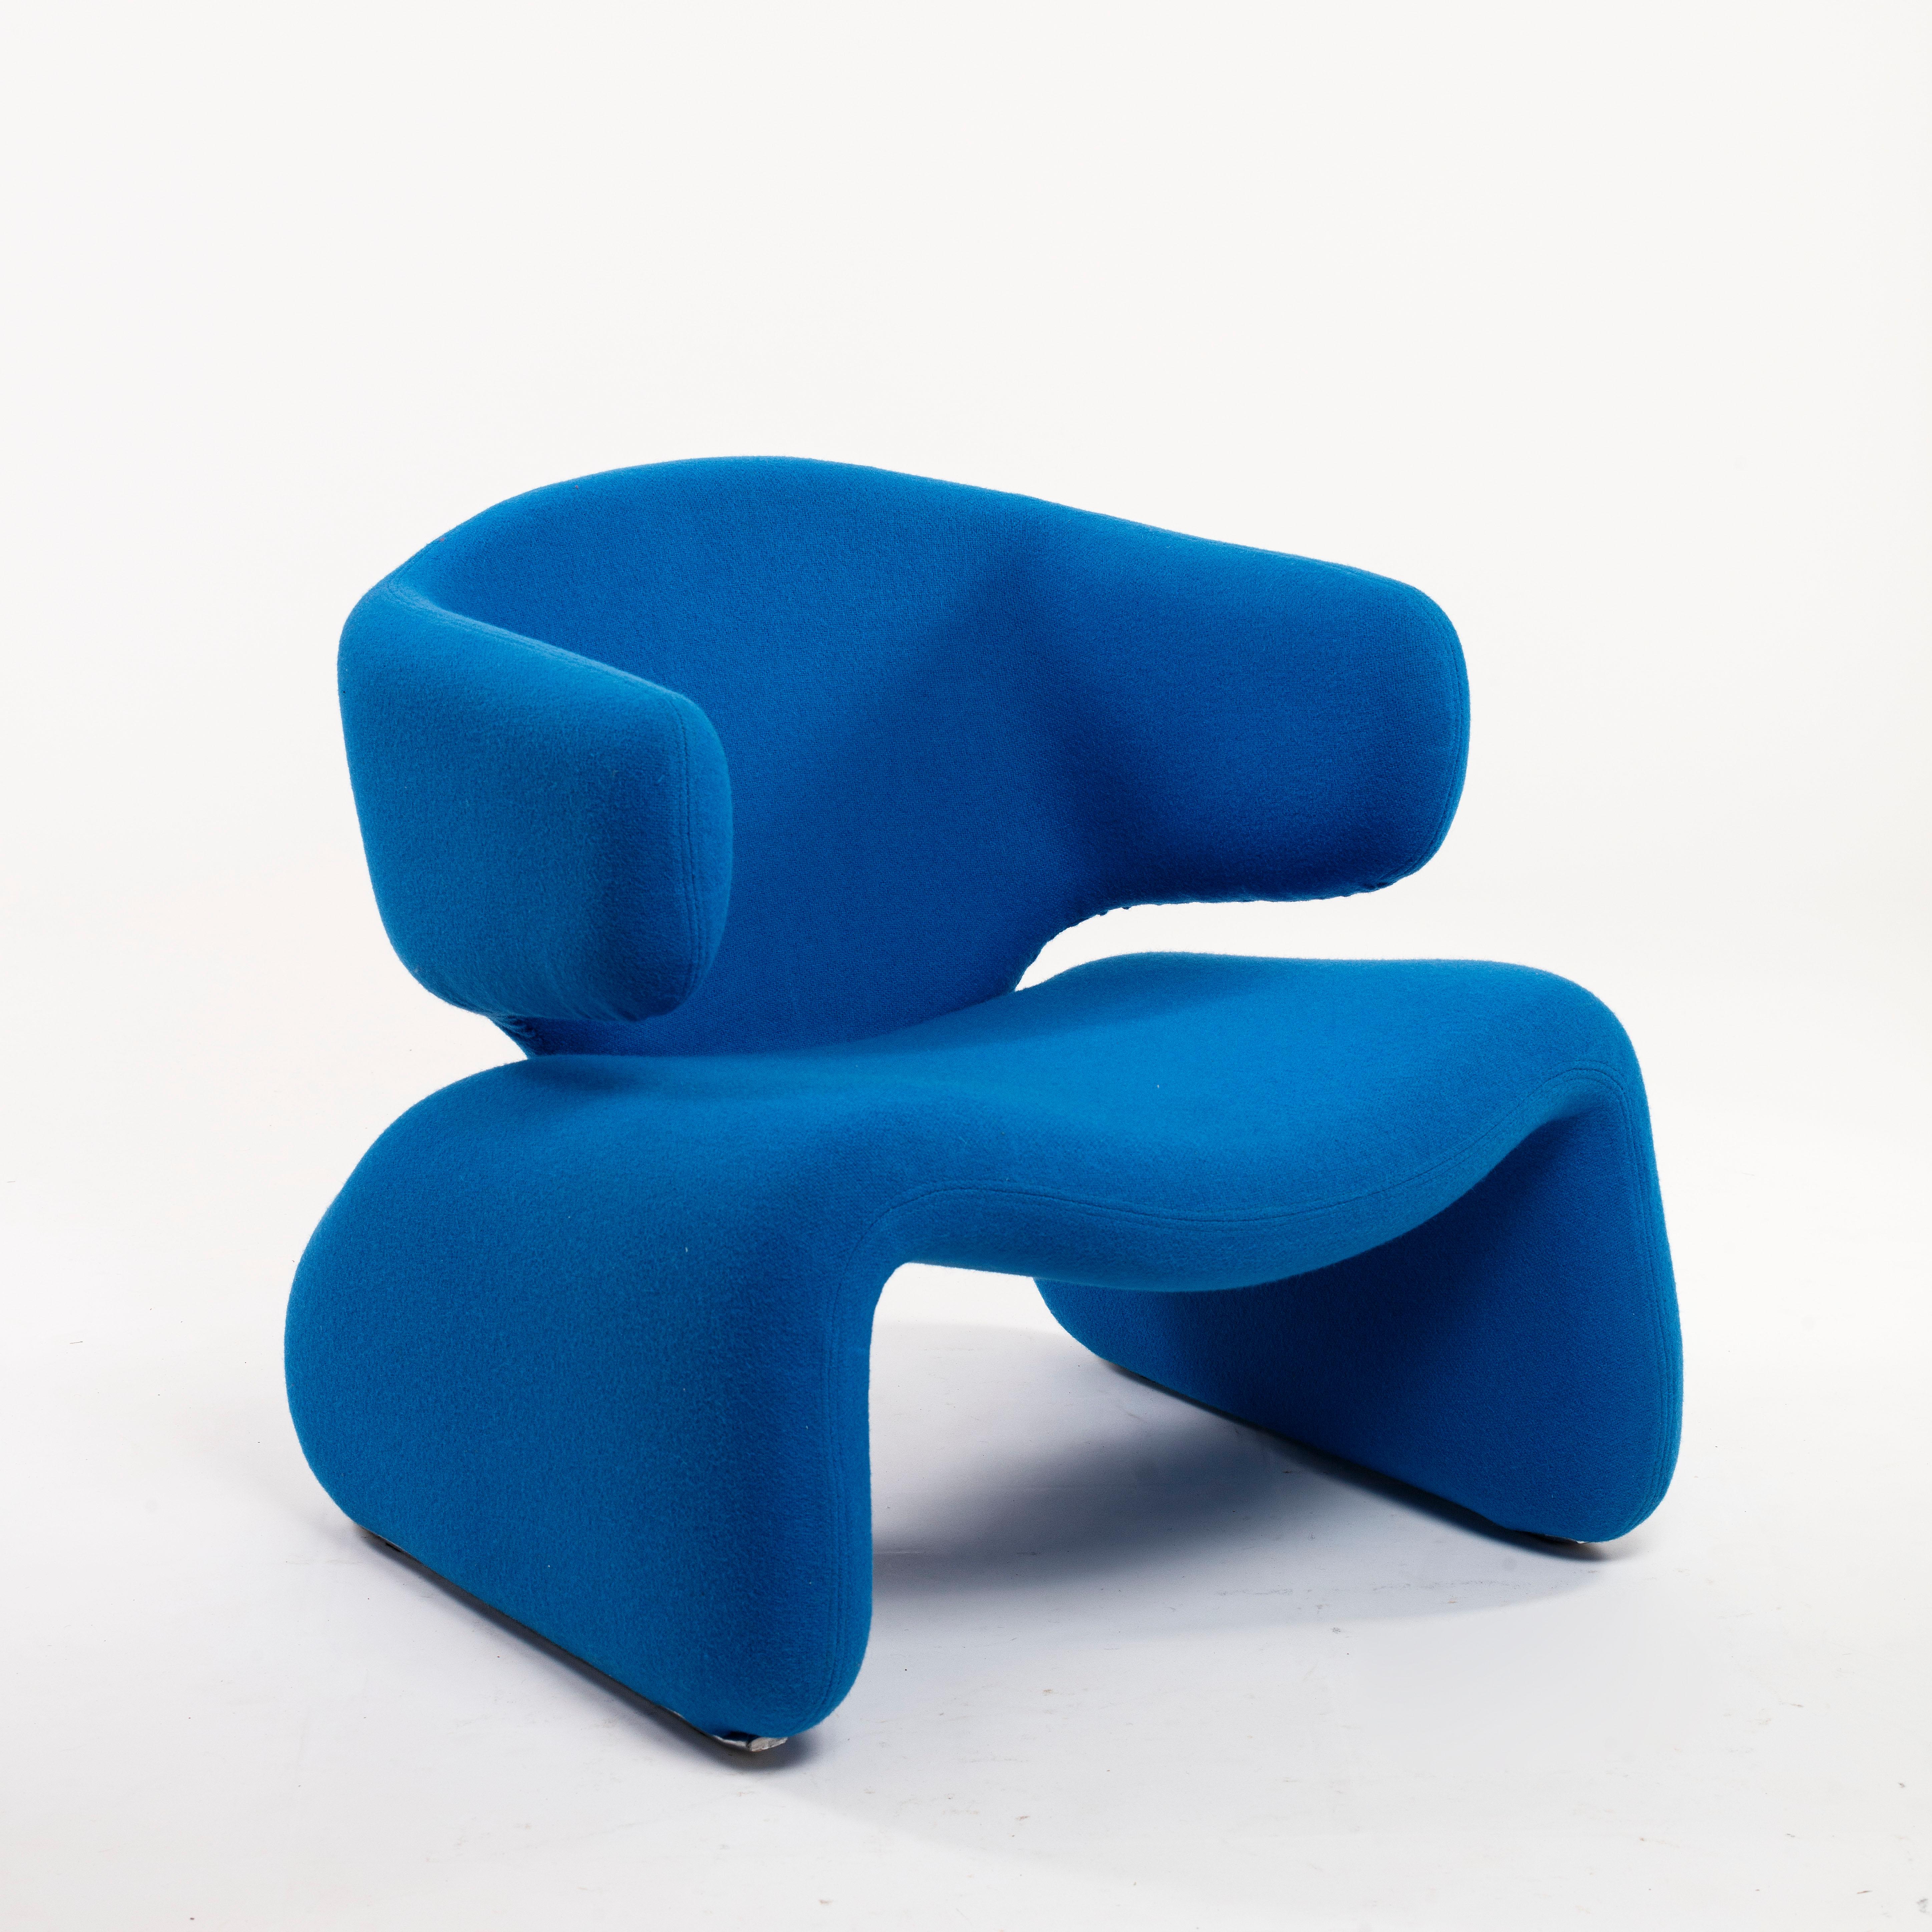 The Djinn armchair, designed by Olivier Mourgue (born 1939) for Airborne in 1964-1065, is one of those very few quintessential and emblematic early space age designs which - much like the character from the 2001 a Space Odissey movie where they were